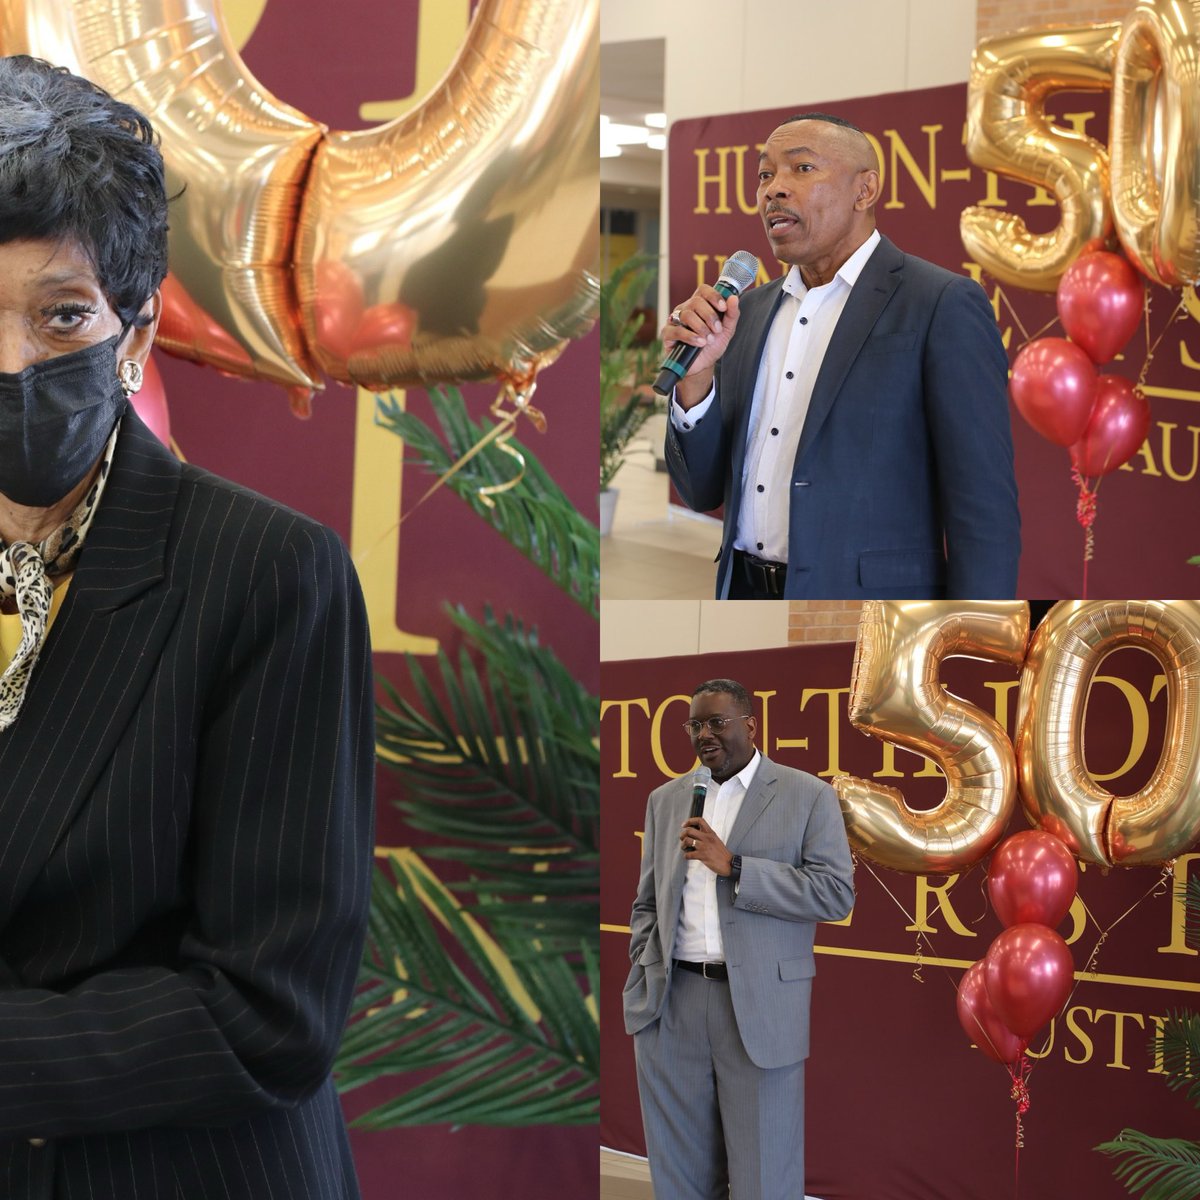 Today, as we celebrate the 4th day of Women’s History Month, Huston-Tillotson University proudly honors Mrs. Earnestine Strickland for her extraordinary 50 years of dedicated service to our institution #HTYou